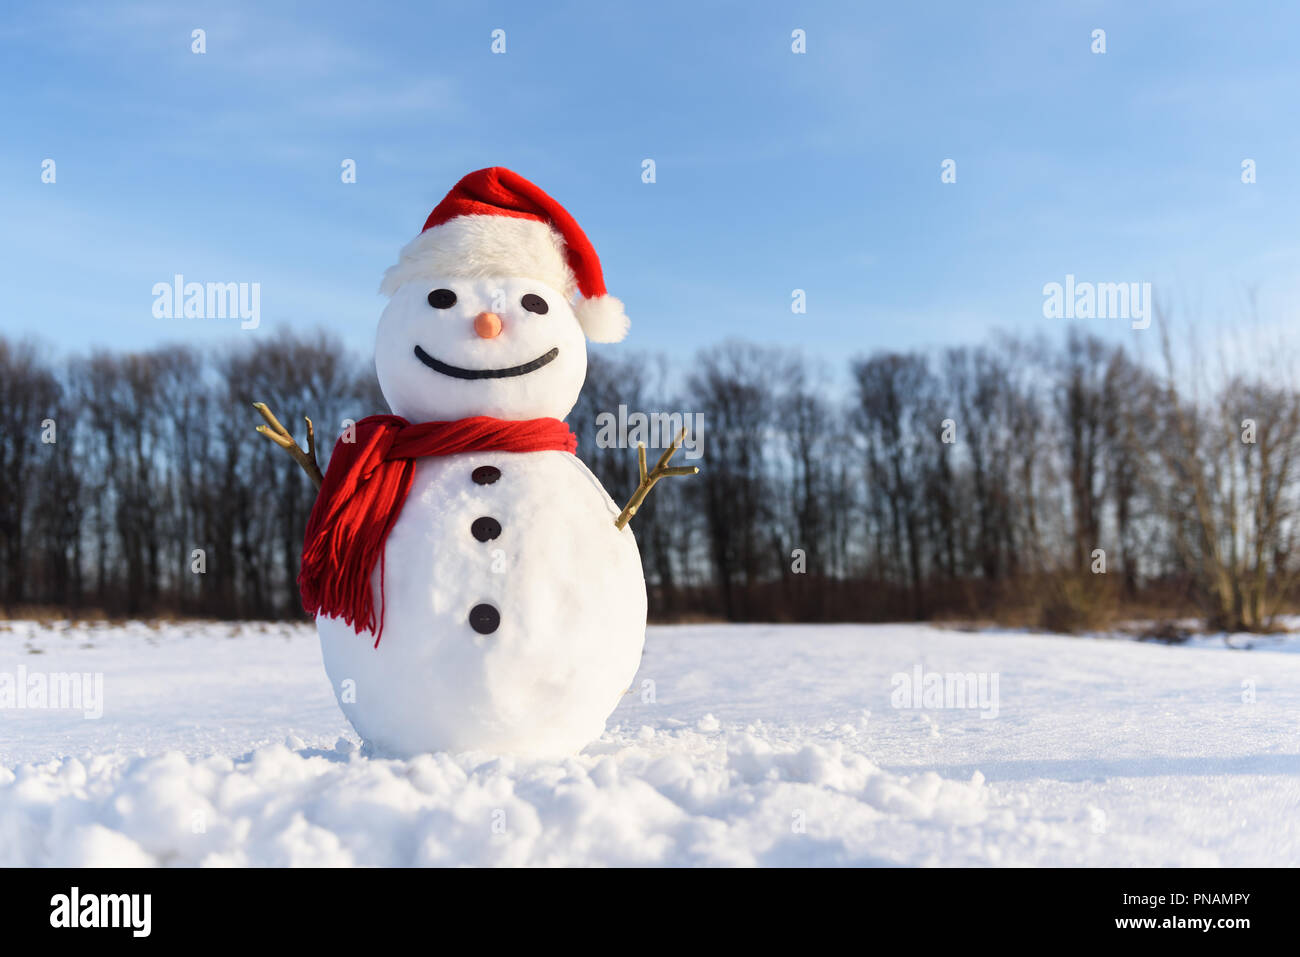 Funny snowman in red hat Stock Photo